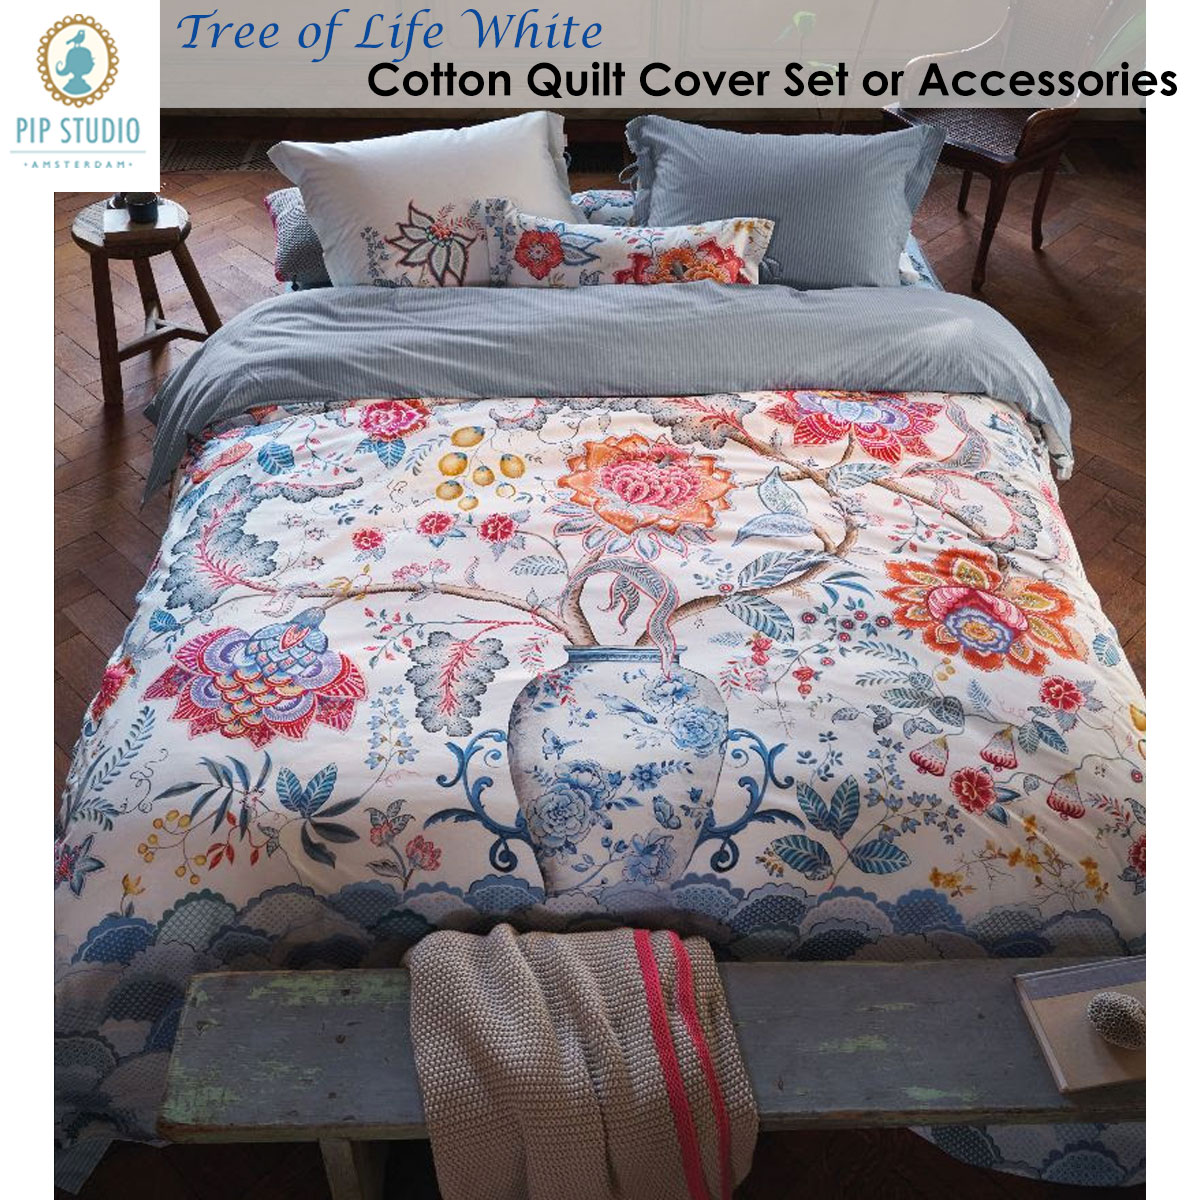 Tree of Life White 100% Cotton Quilt Cover Set or Accessories by PIP Studio